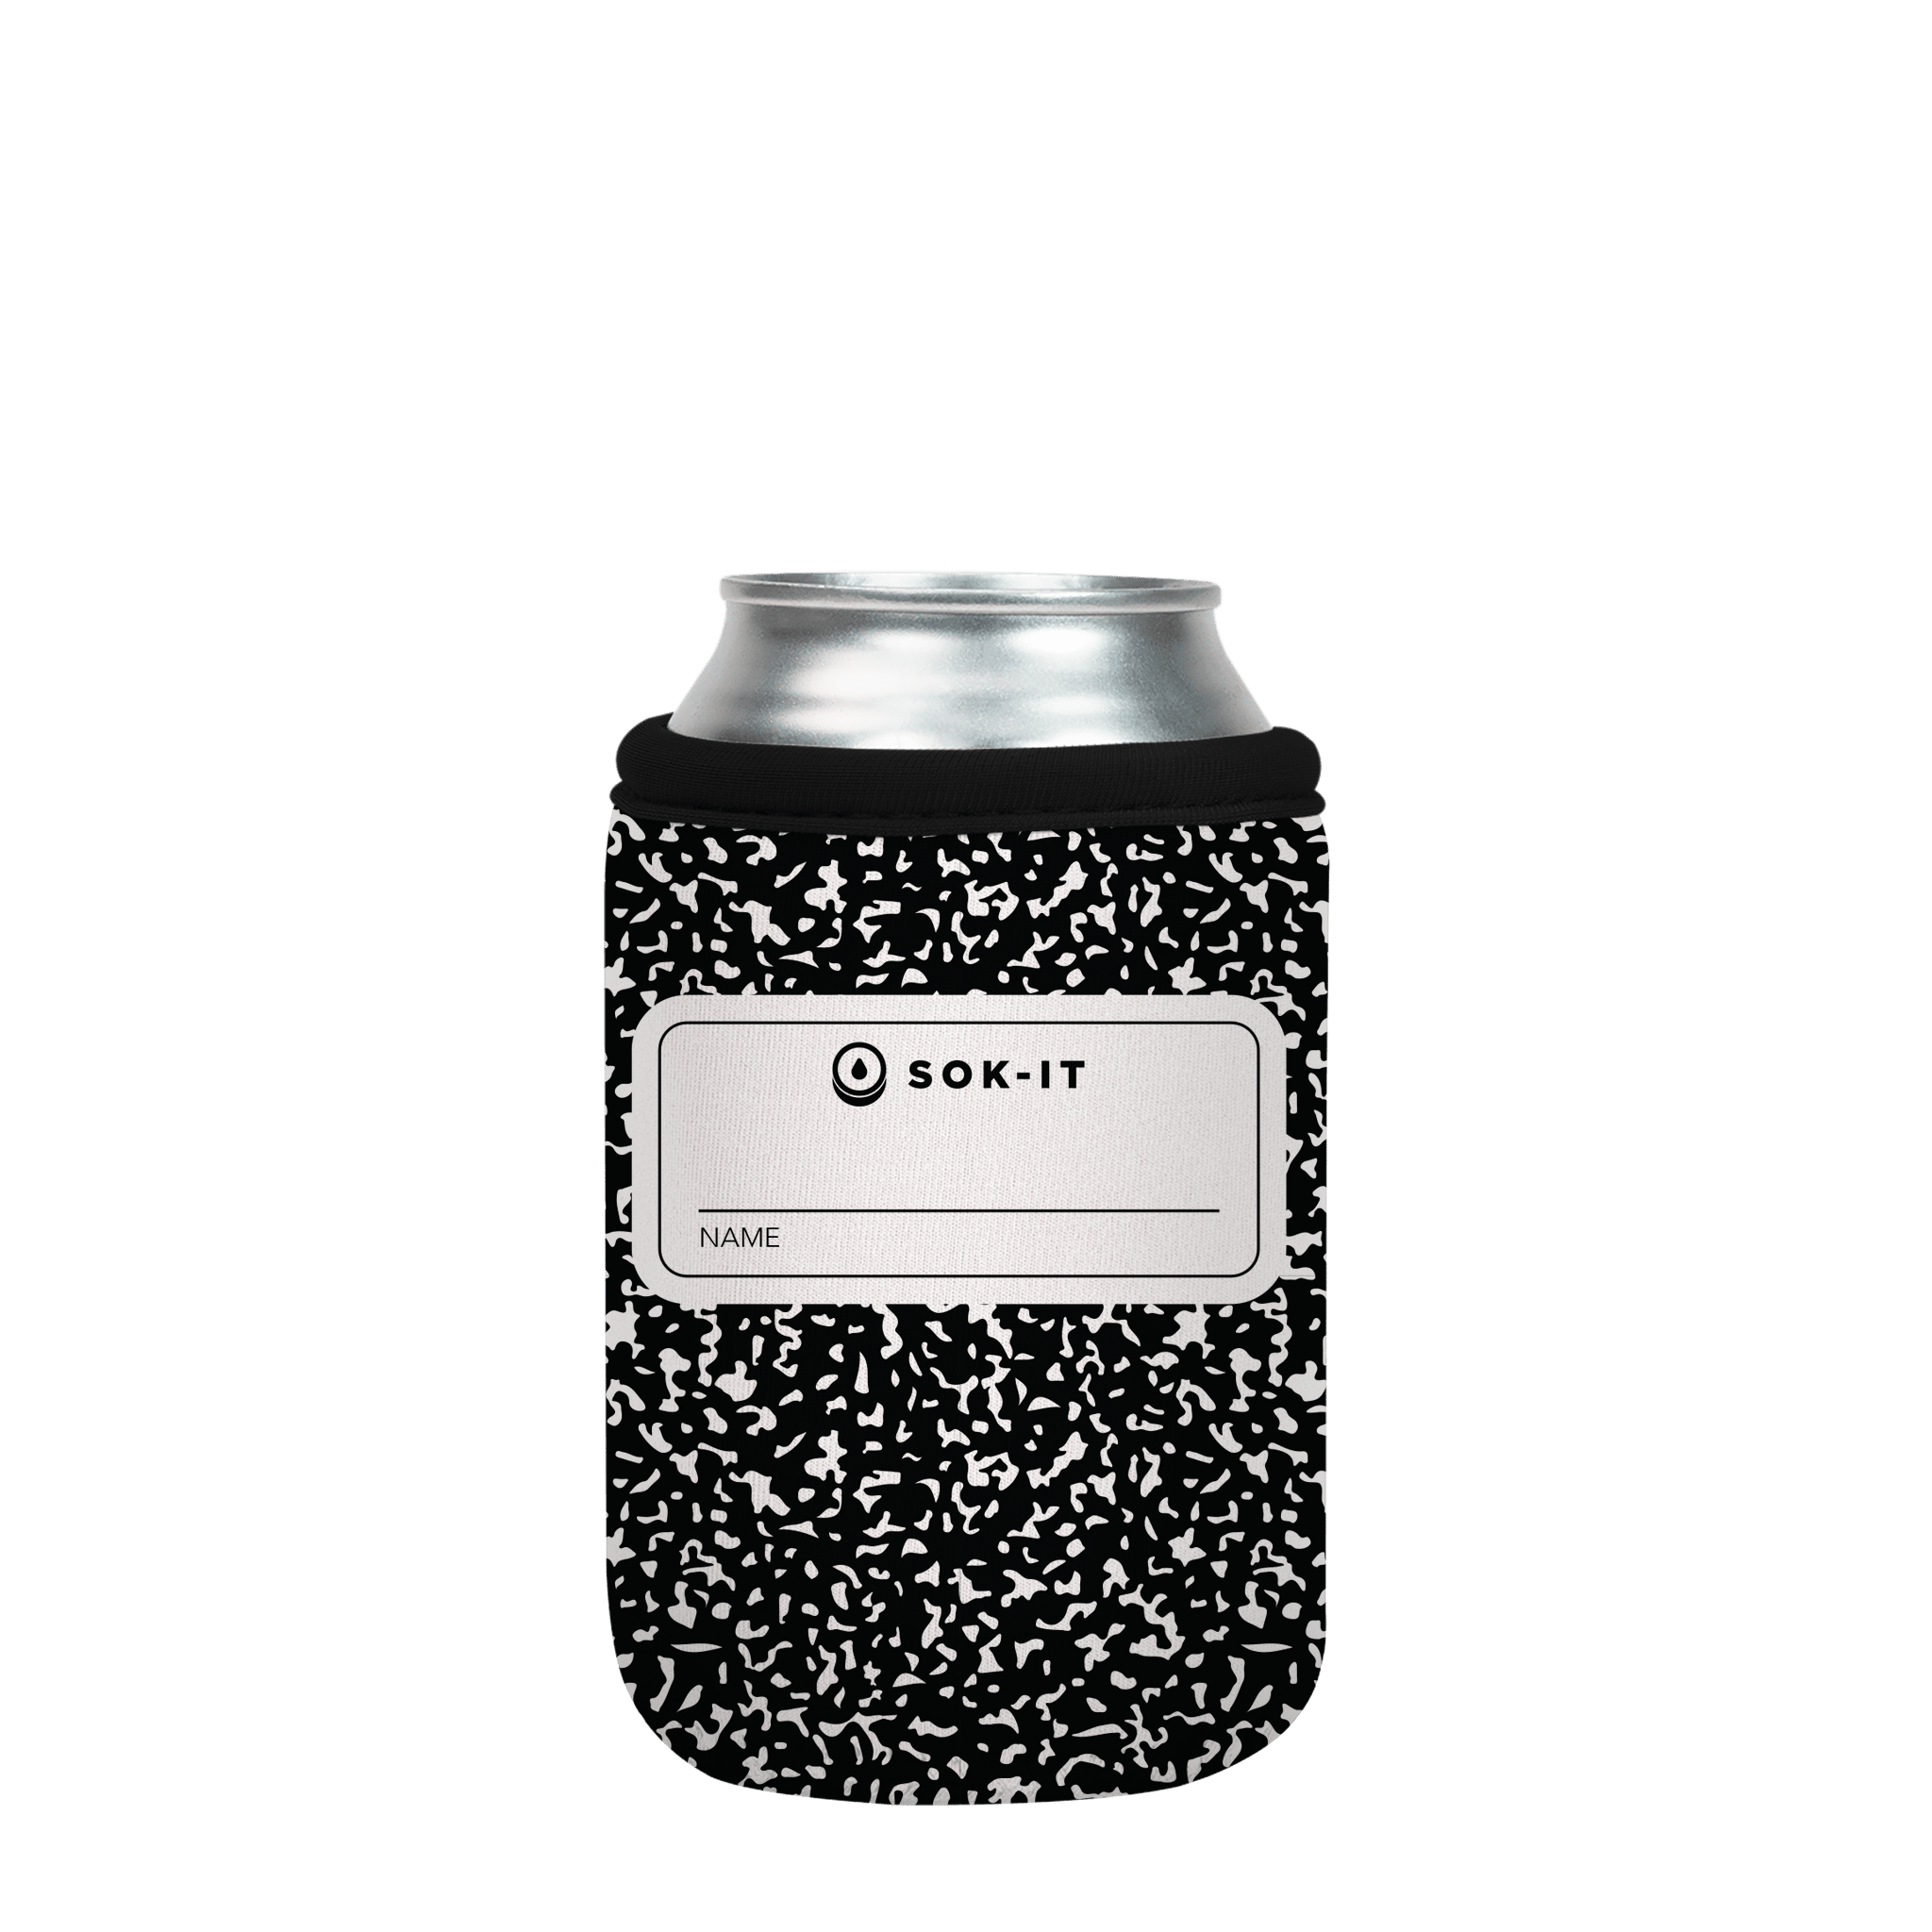 CanSok Compose Yourself 12oz Can